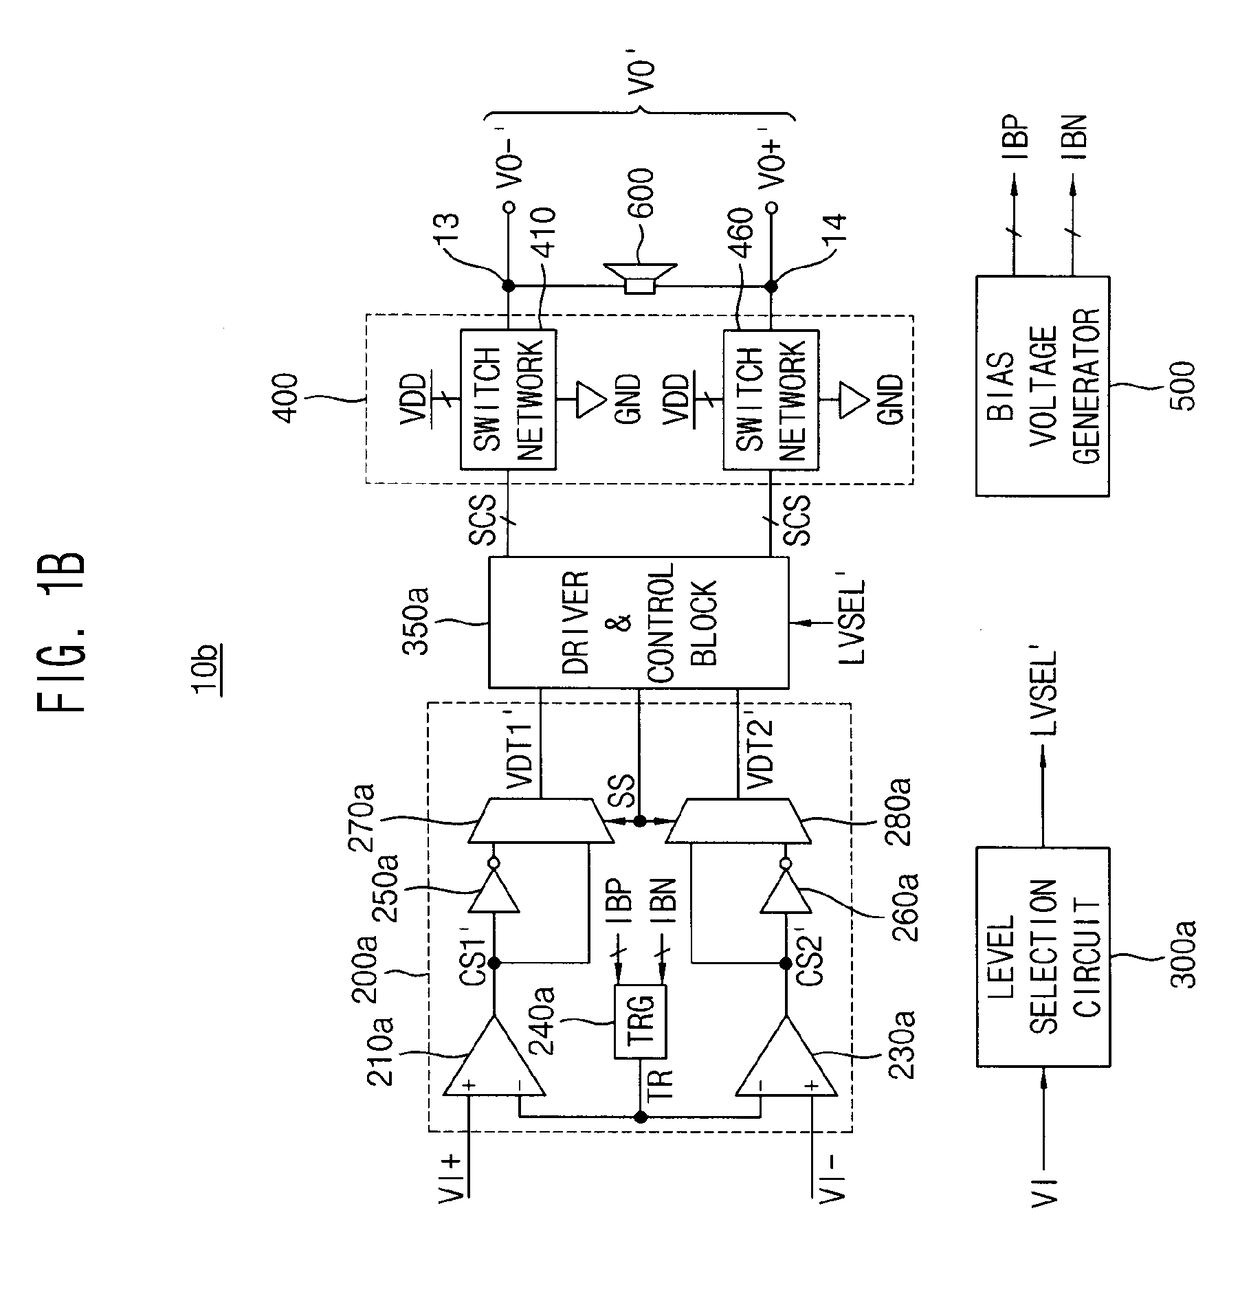 Class-d amplifier, audio processing apparatus and method of driving class-d amplifier